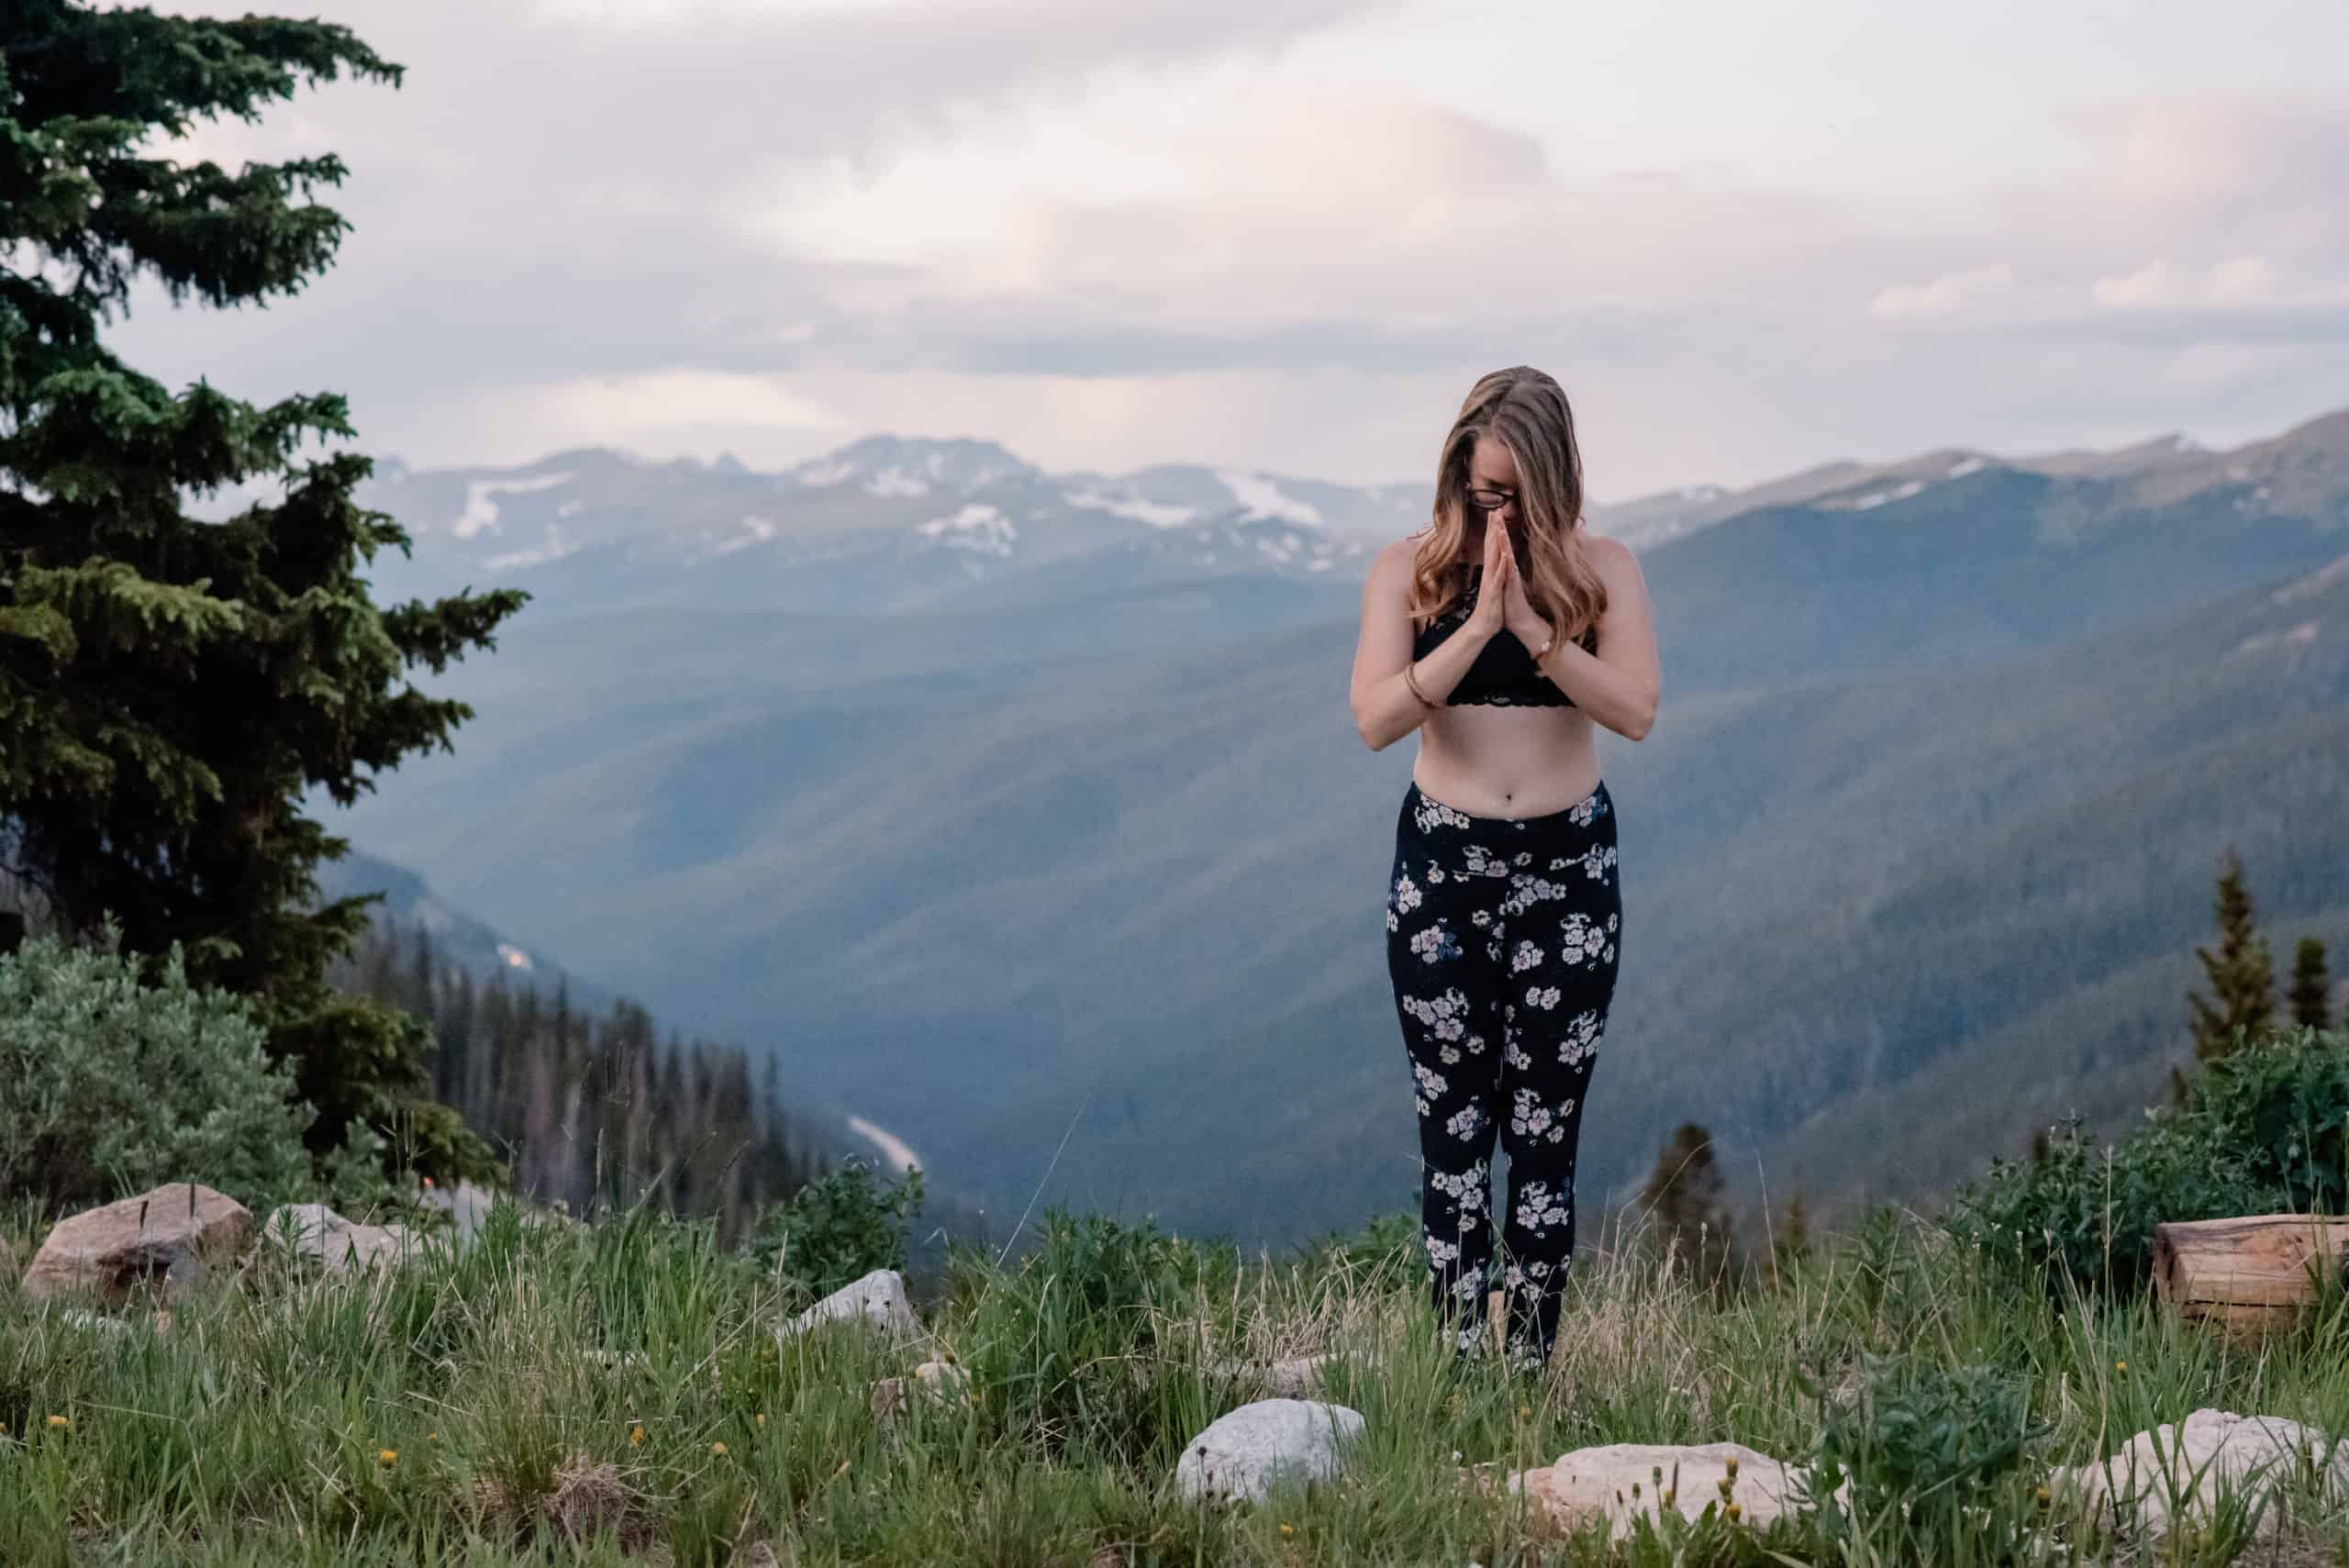 emmy bowing in self love yoga pose of namaste hands on top of a mountain after sunset